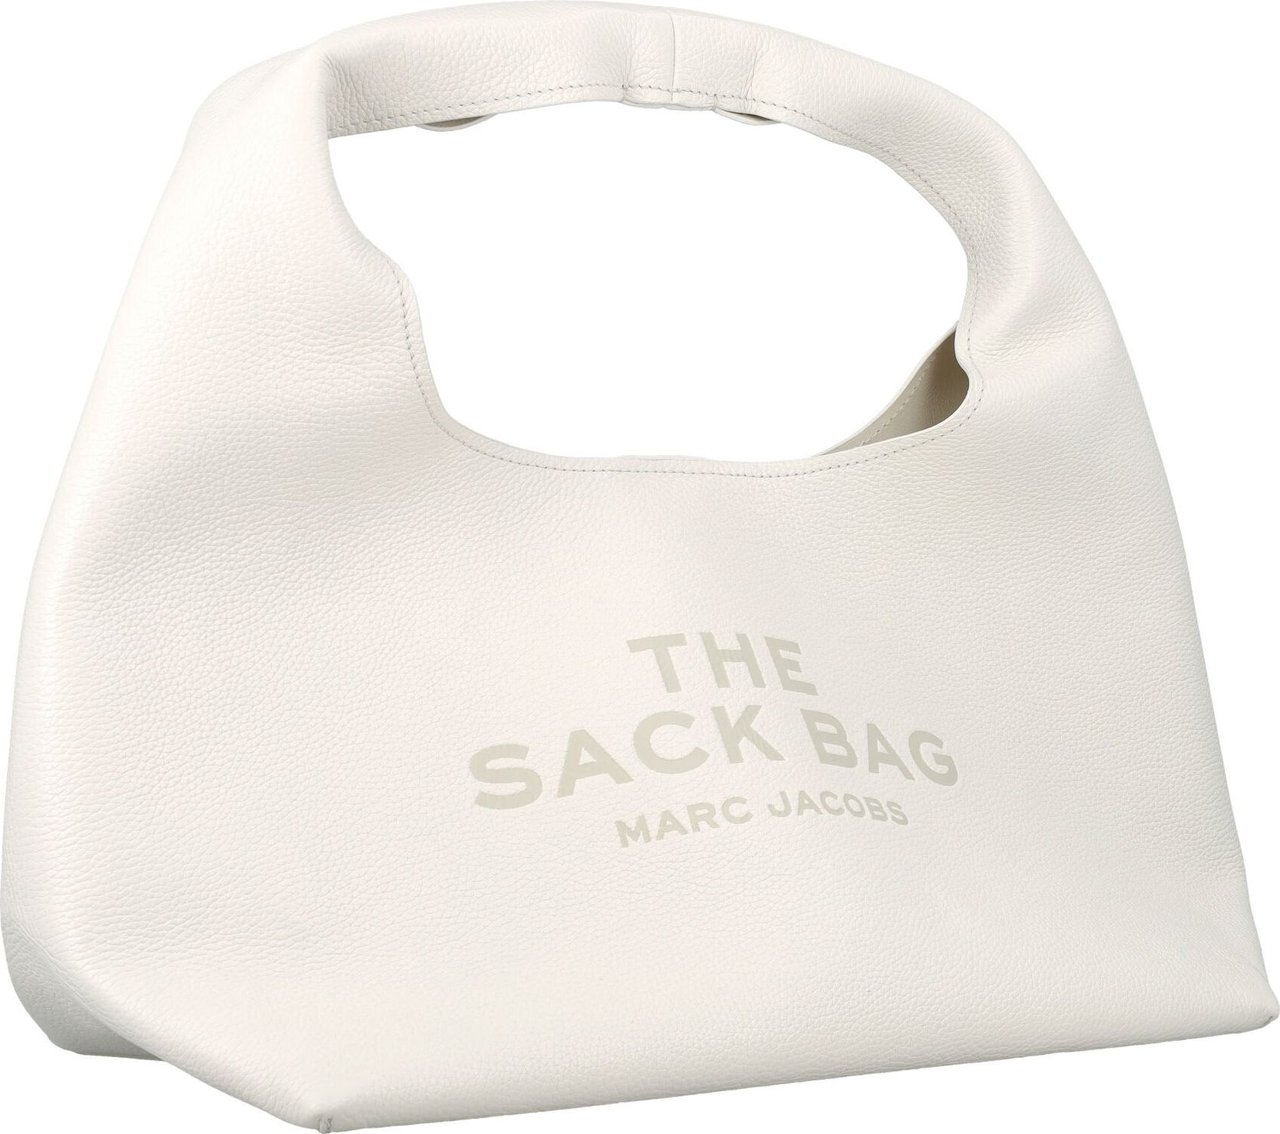 Marc Jacobs THE SACK Wit